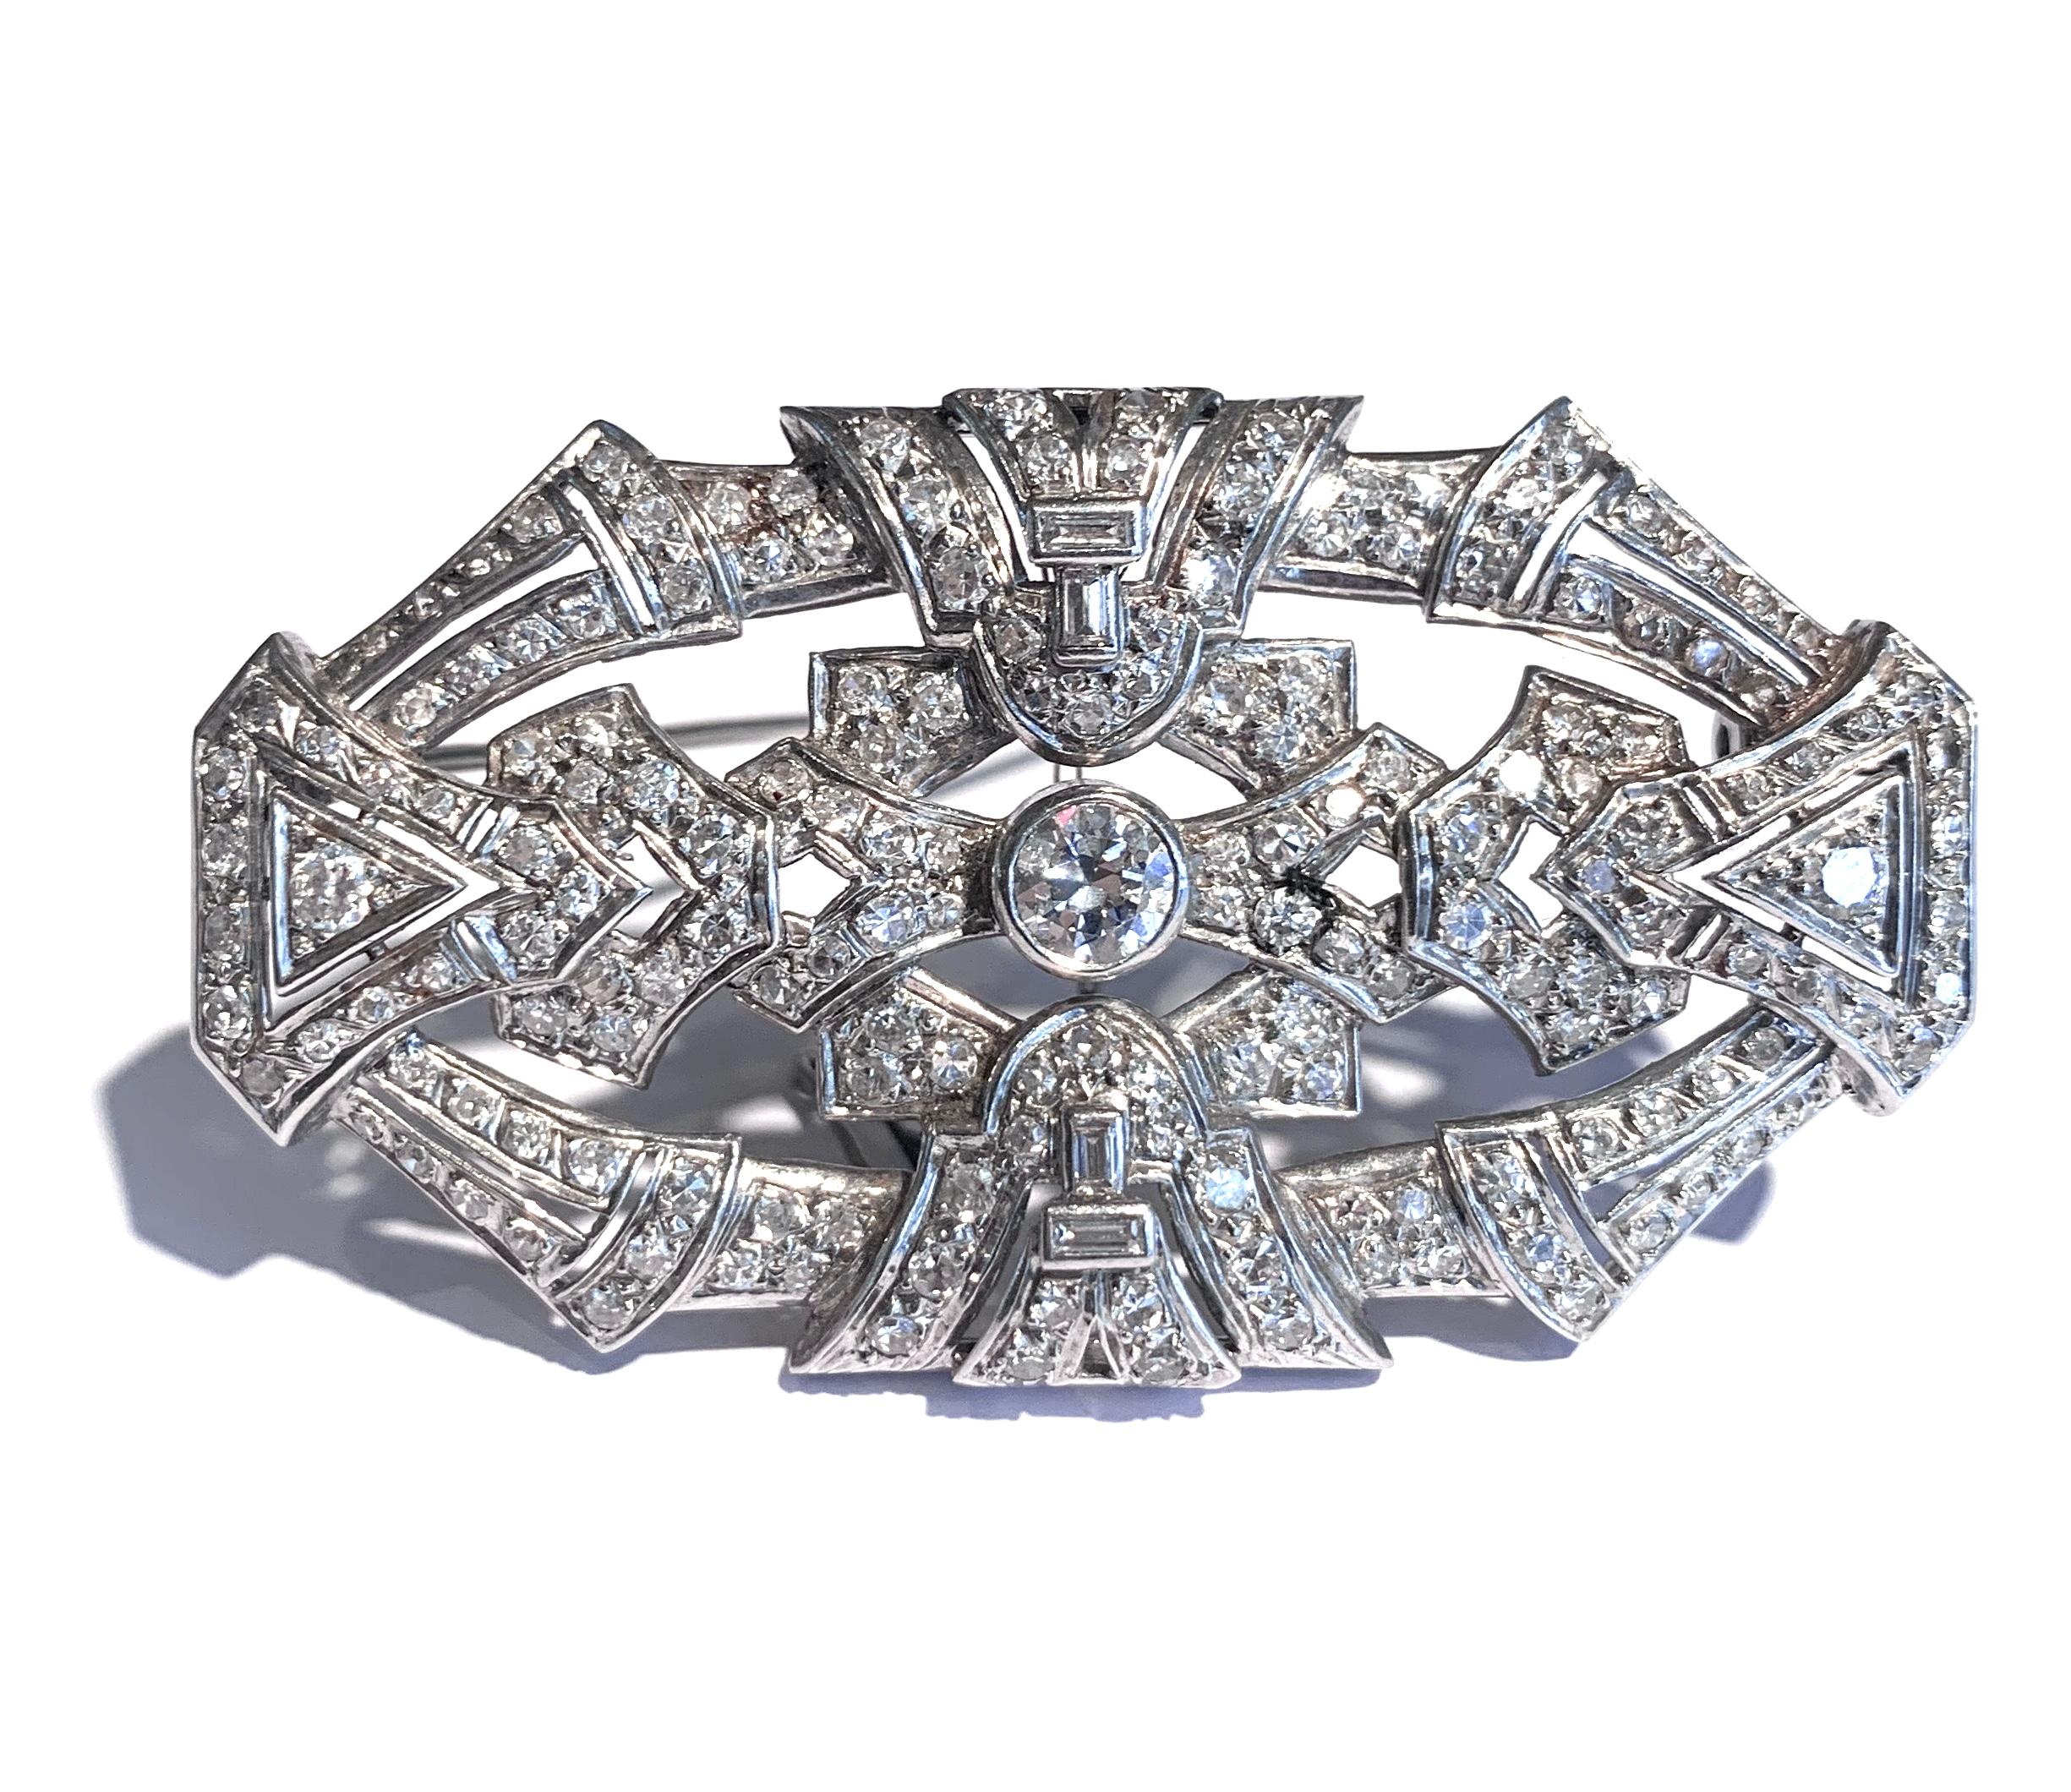 Brooch set with a 0.50 carat round cut central diamond and paved with round and baguette diamonds.

Double pin and security chain.

Platinum (900/000th)

Total weight of the diamonds : 2.50 cts

One of a kind jewelry

French work

Circa